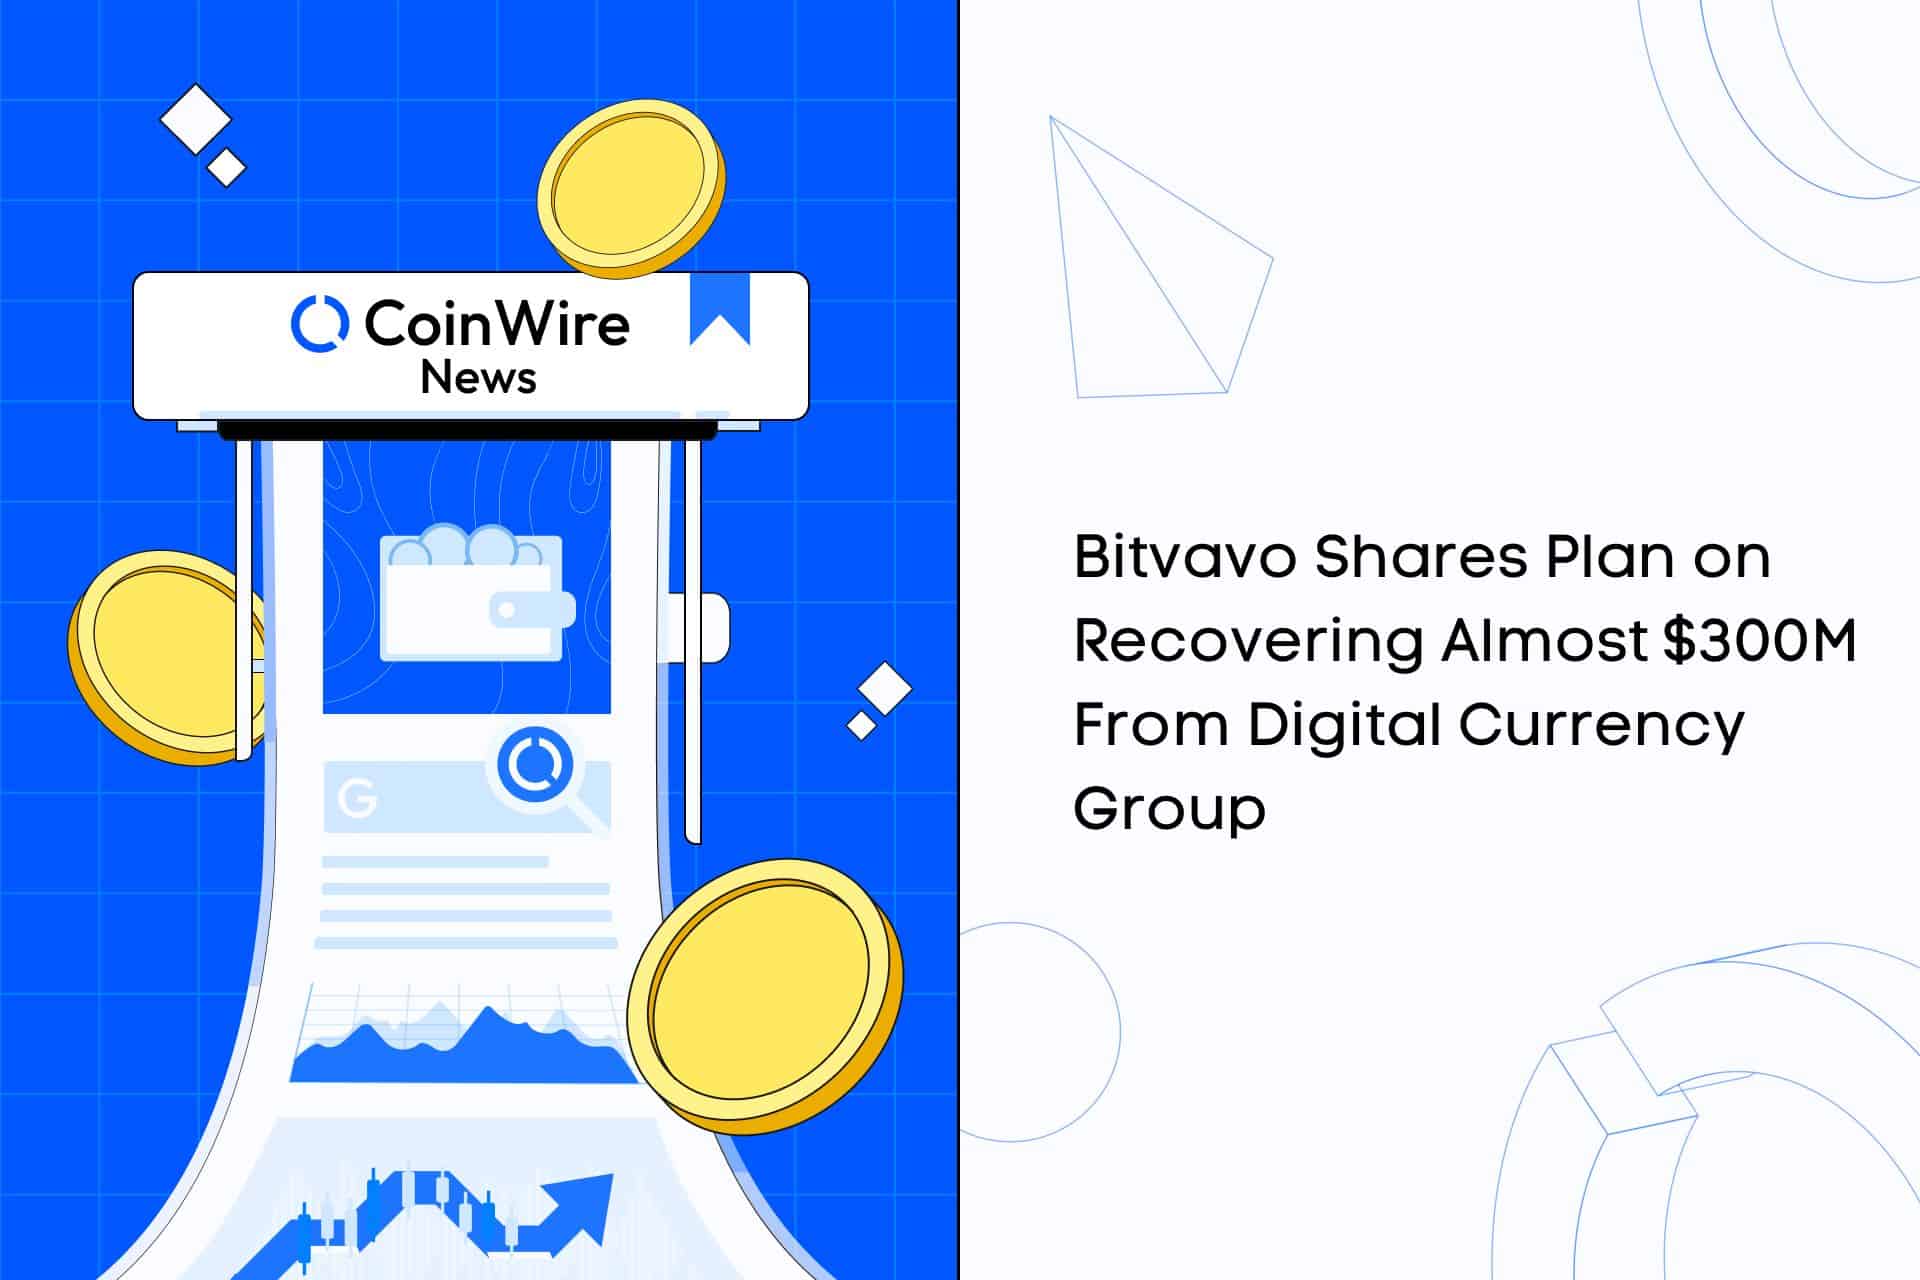 Bitvavo Shares Plan On Recovering Almost $300M Funds And Assets From Digital Currency Group